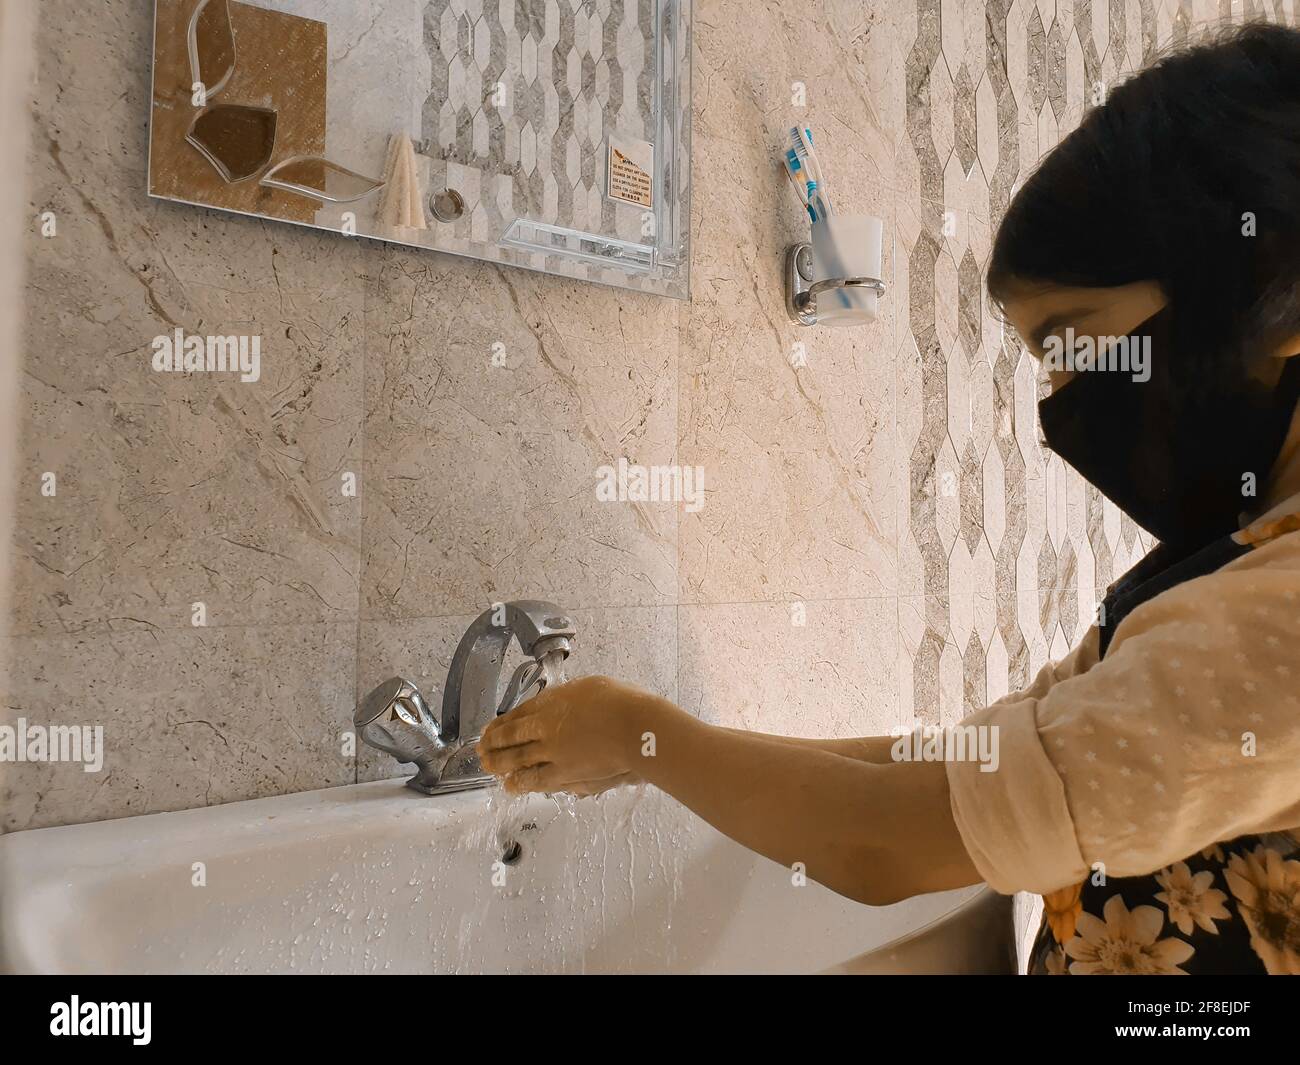 Masked Children washing hands during coronavirus pandemic. Hand wash mask wearing and using sanitiser are recommended by world health organisation. Stock Photo